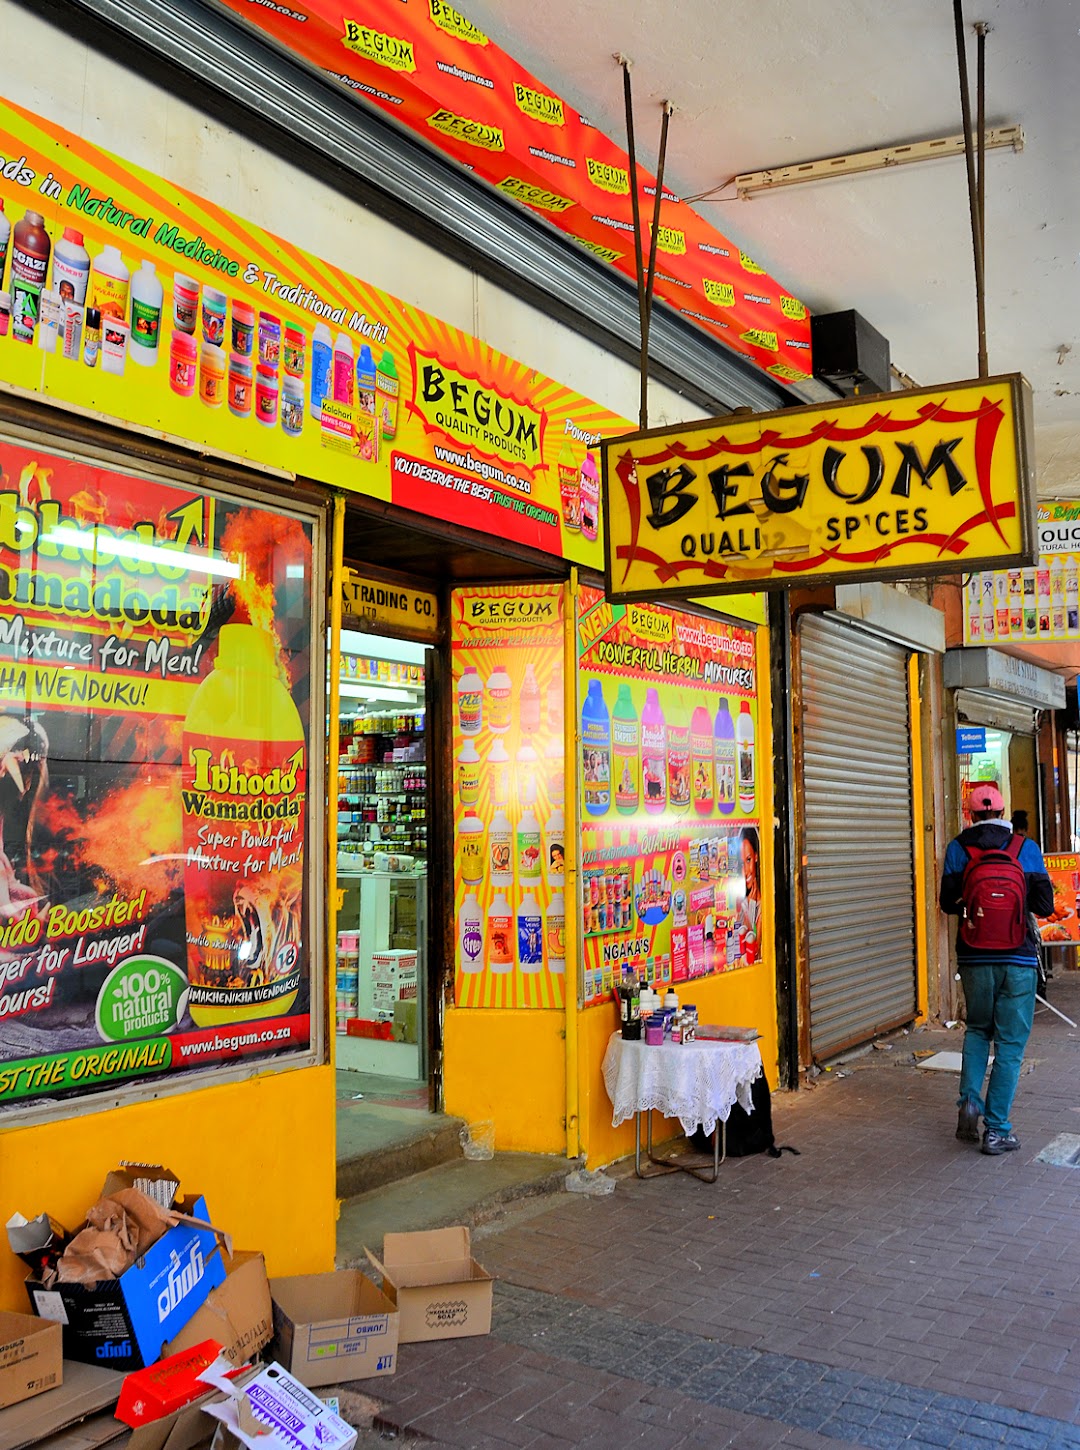 BEGUM TRADING CO